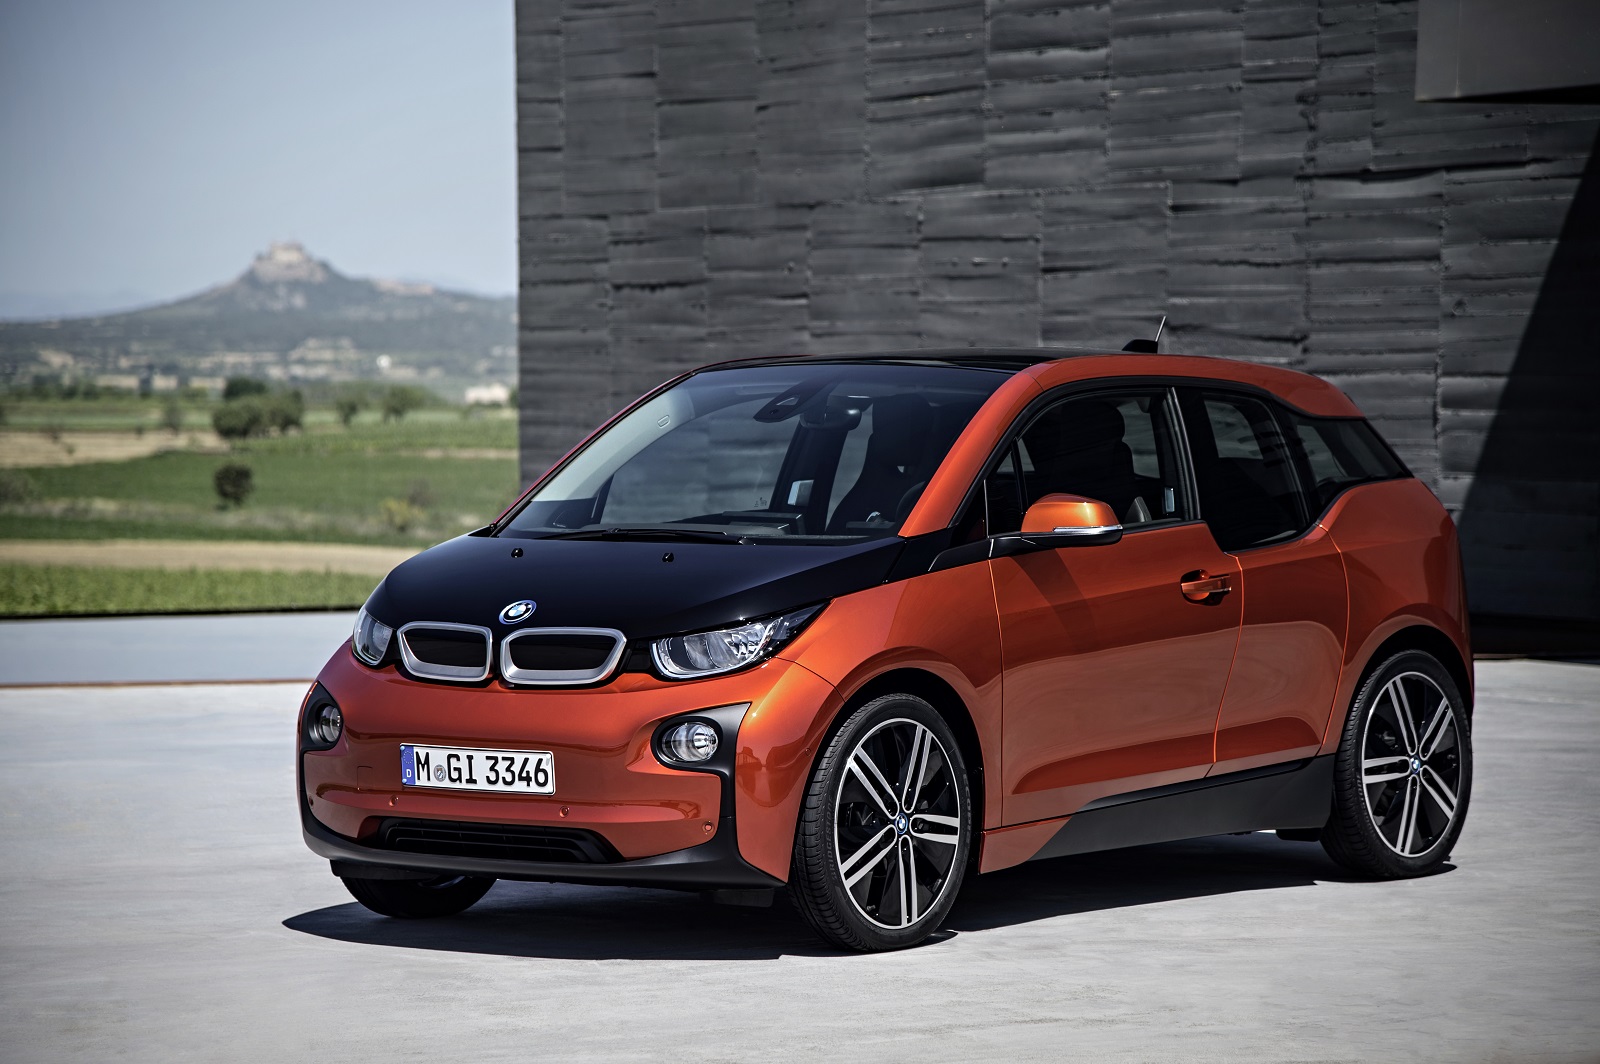 Consumer Reports avoid buying used 2014 BMW i3 electric cars